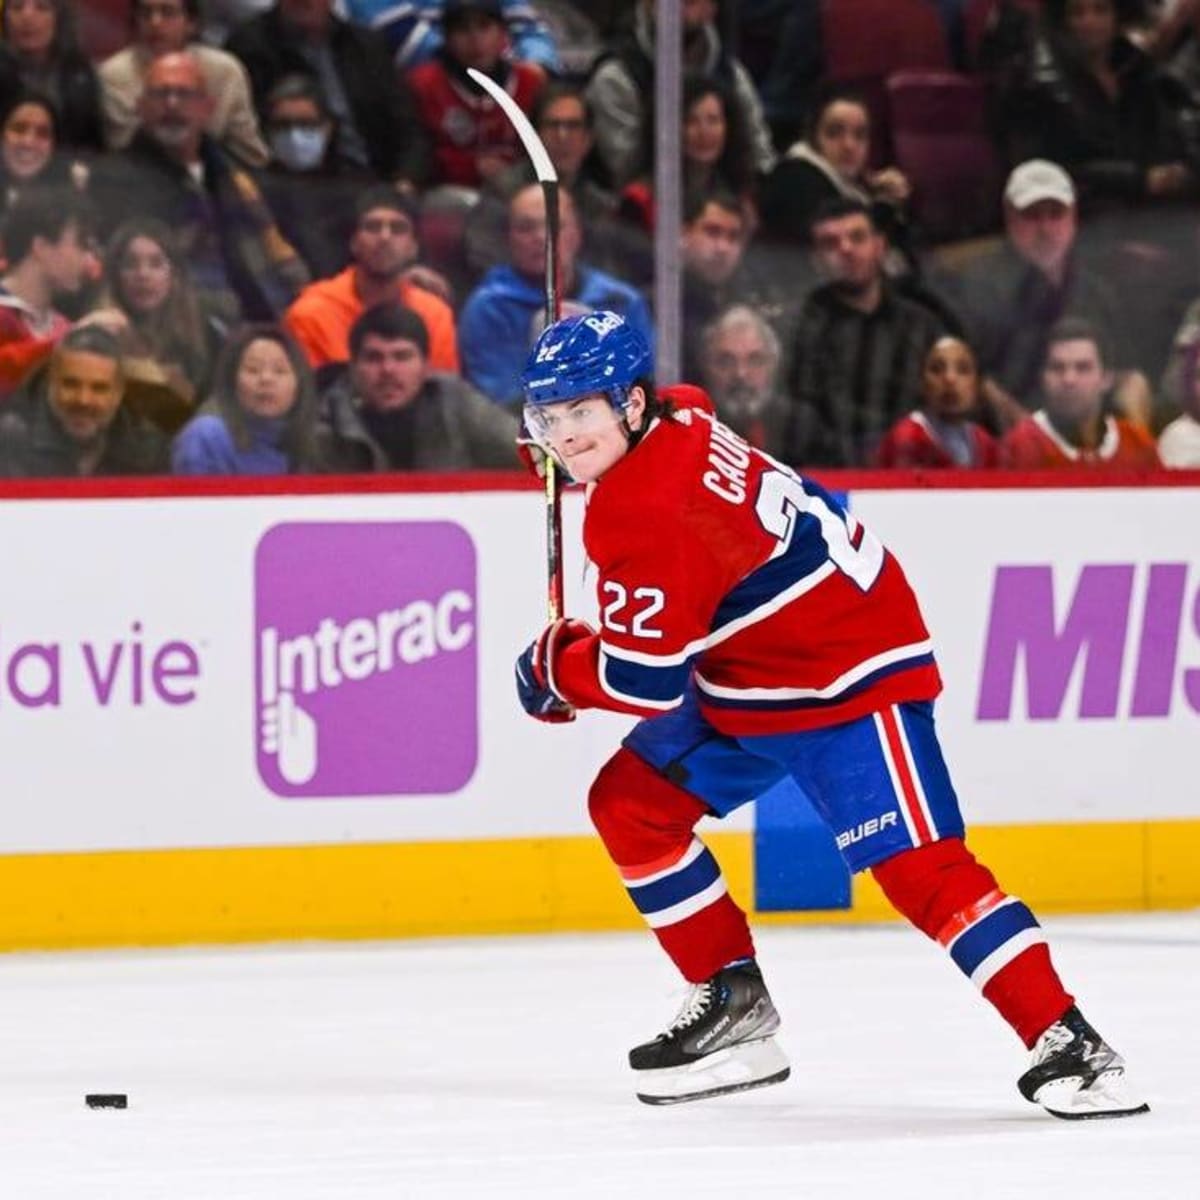 Cole Caufield scores in OT as Canadiens edge Capitals 3-2, Hockey